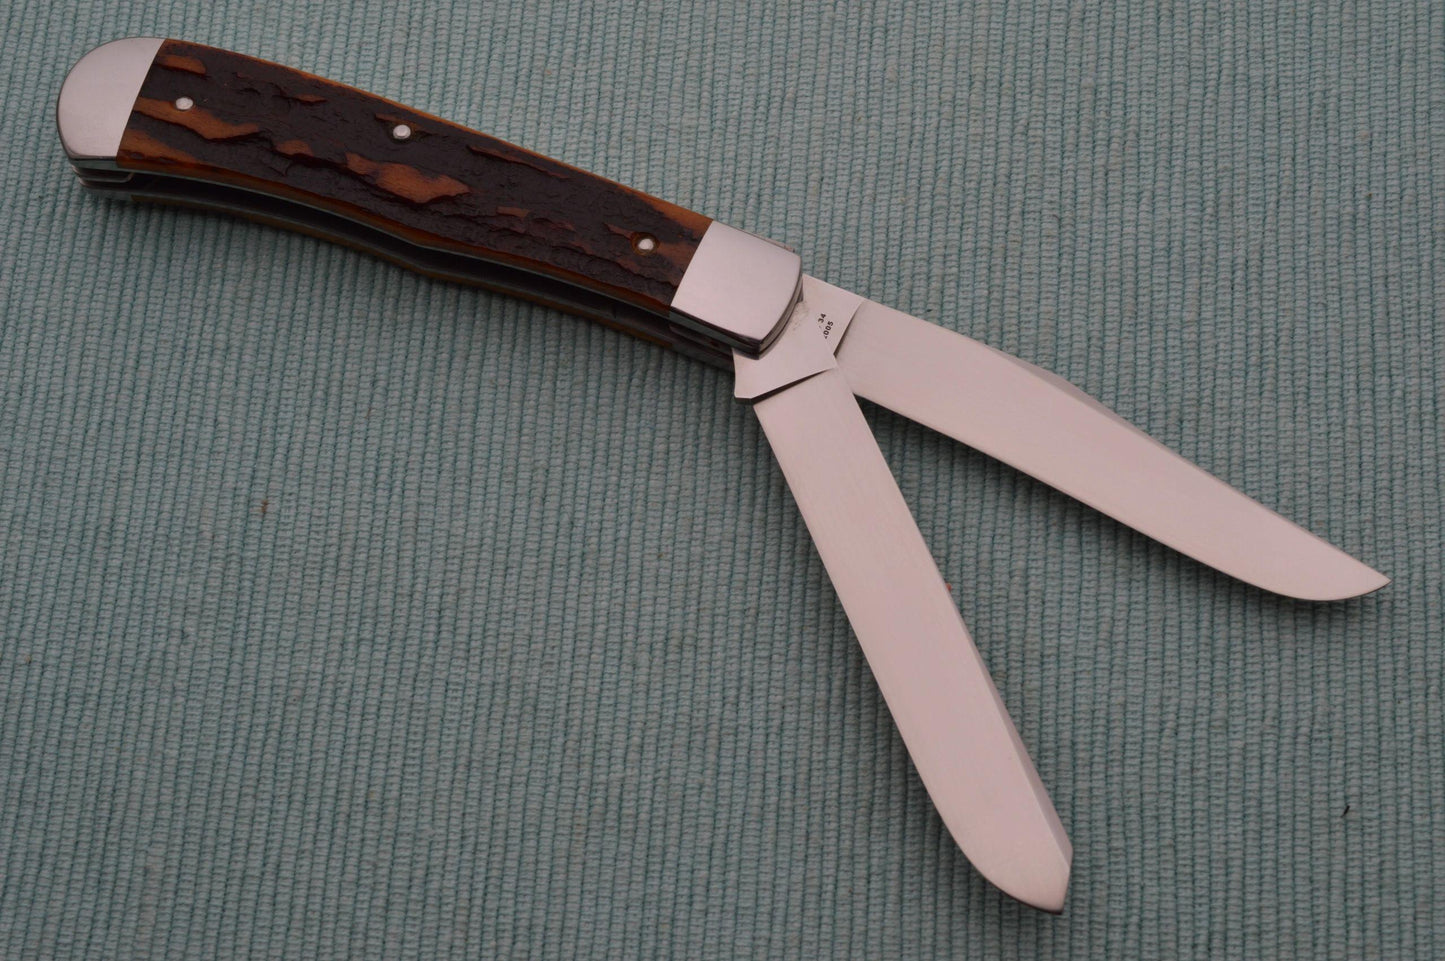 Terry Davis Two-Blade Stag Trapper, Slip-Joint Folding Knife